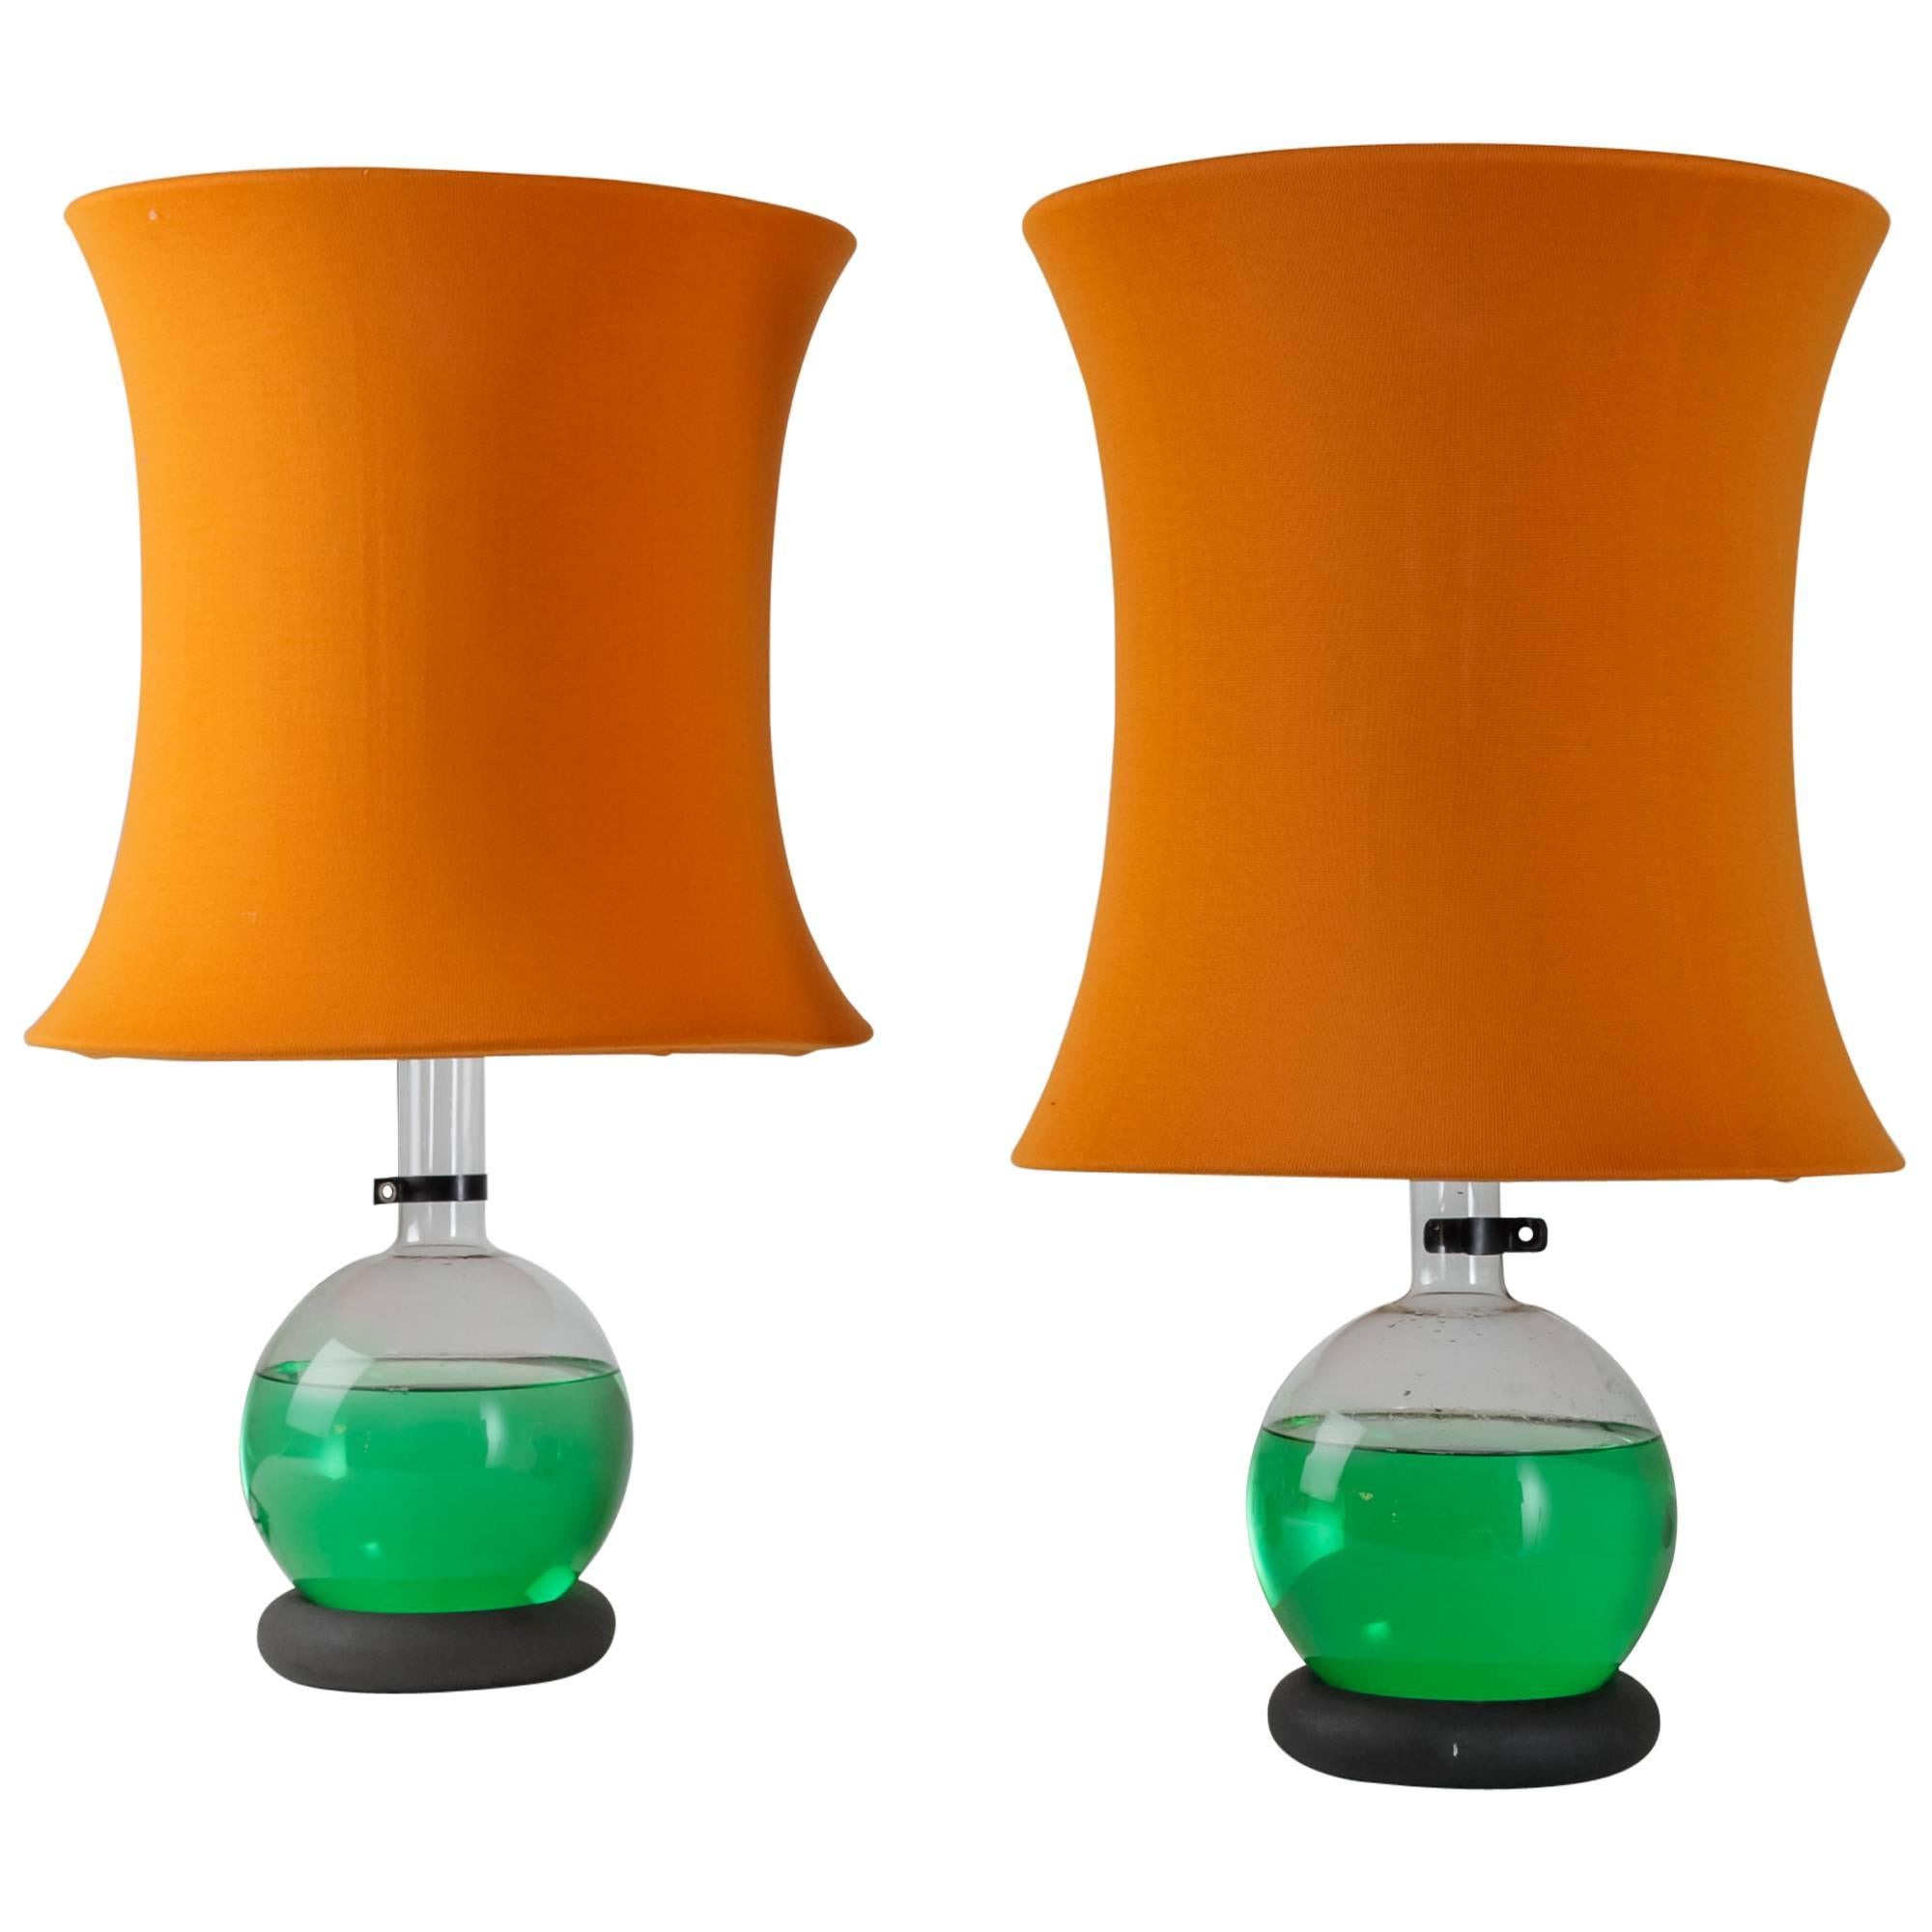 Pair of Lotus Lamps with Adjustable Colour Liquid, Italy, 1960s For Sale